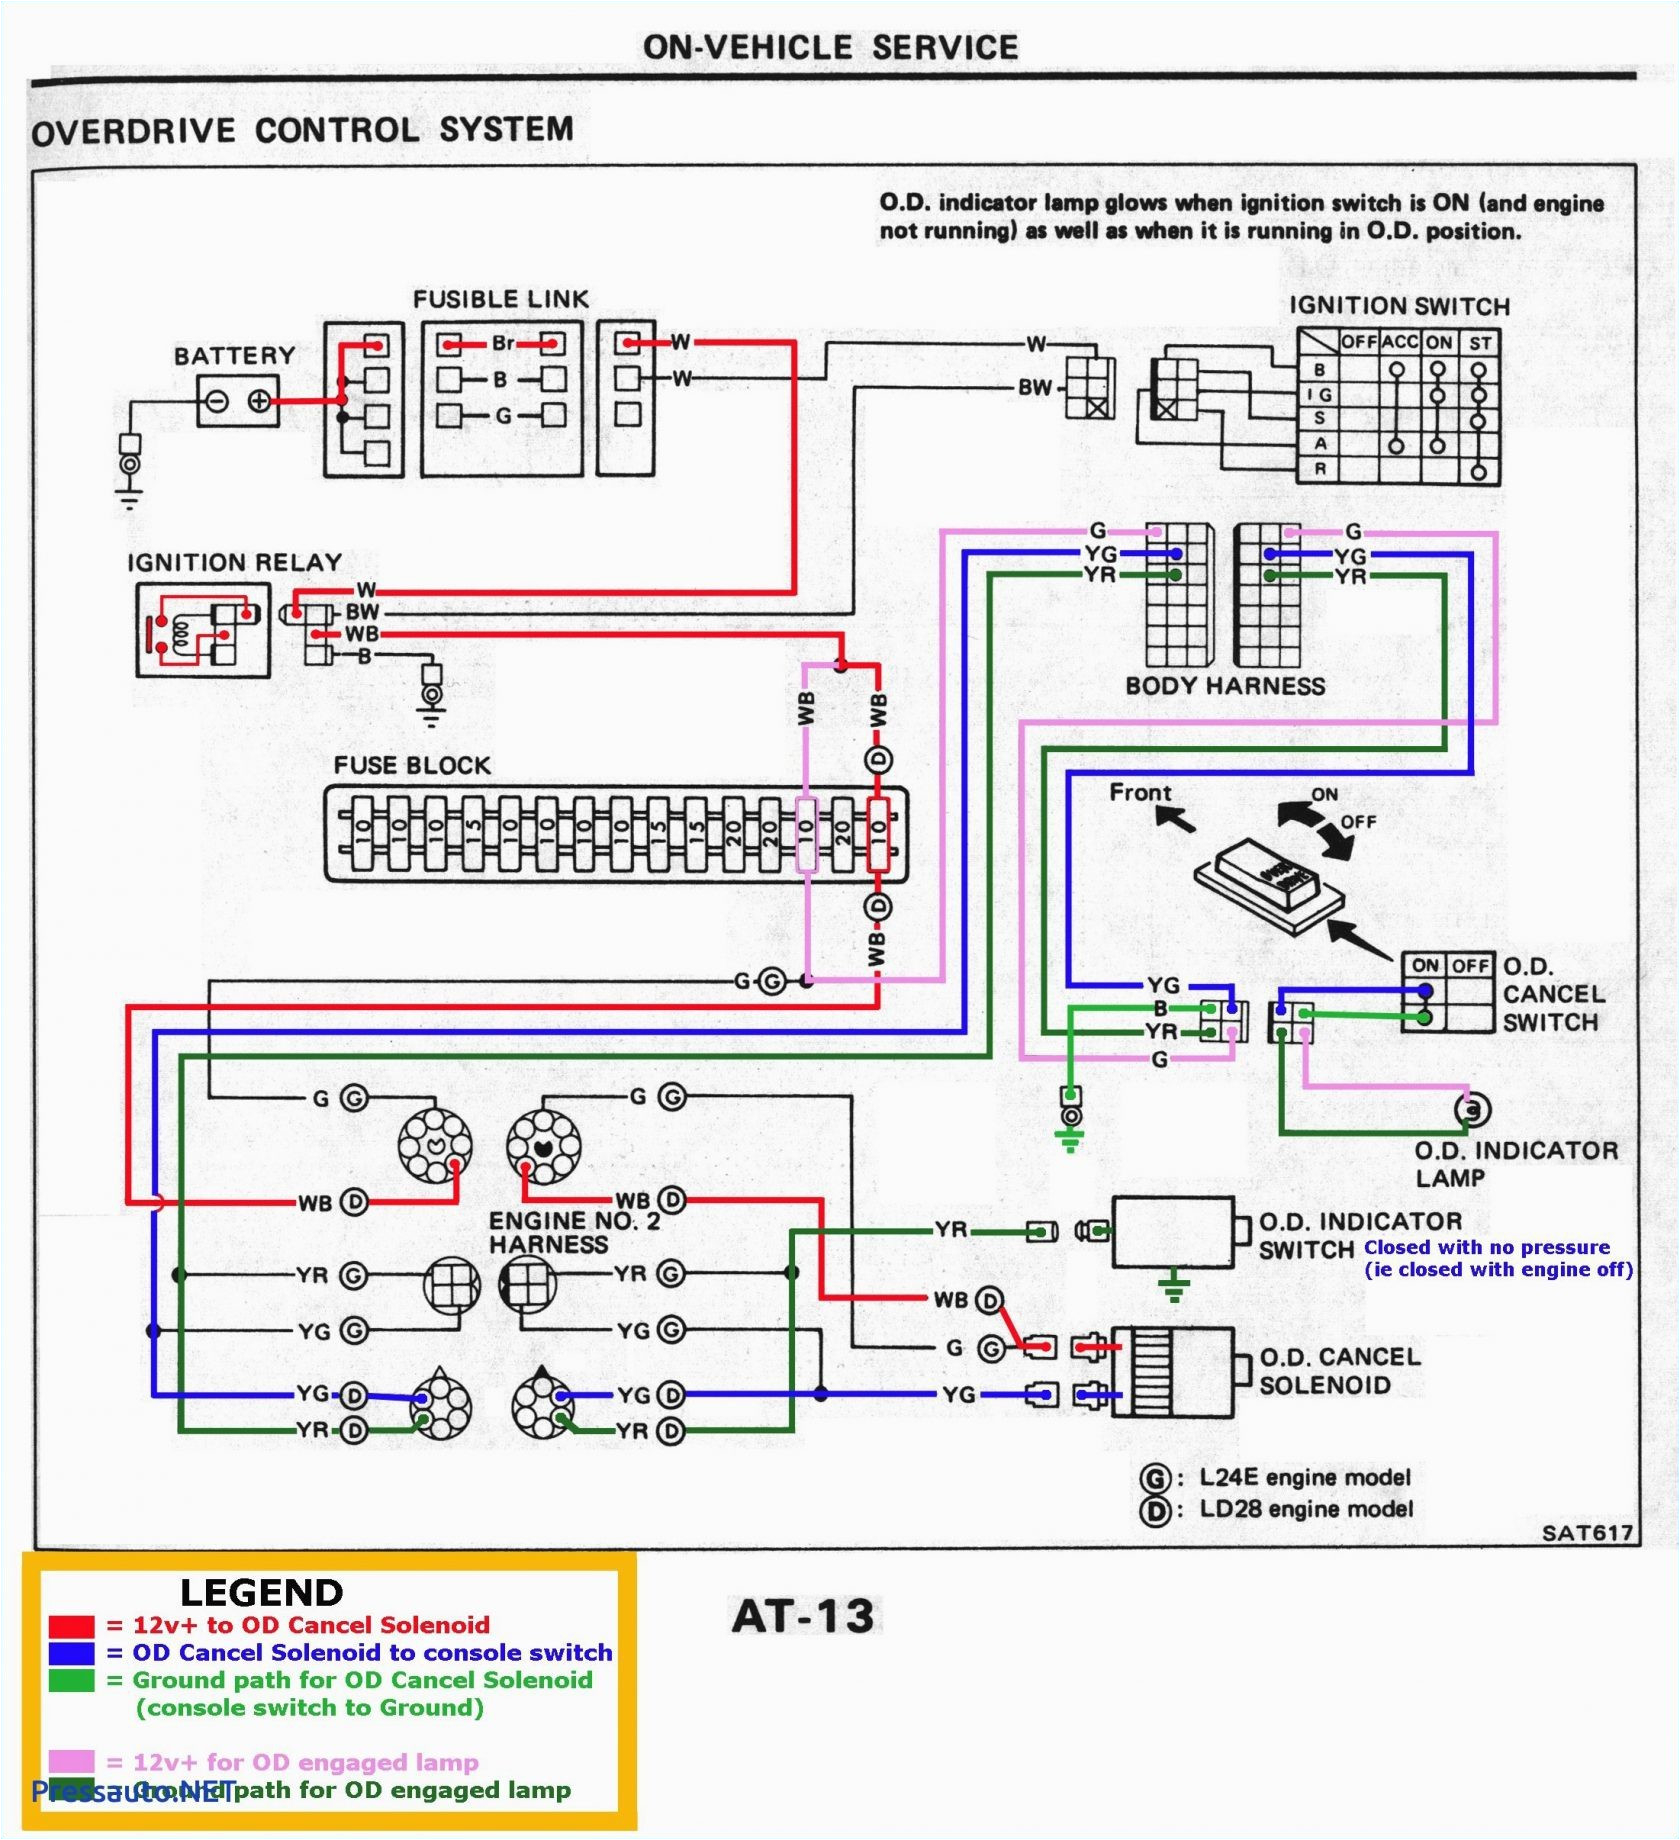 wiring diagram for 2008 chevy suburban get free image about wiring lennox air handler wiring diagram cb31 41 1p